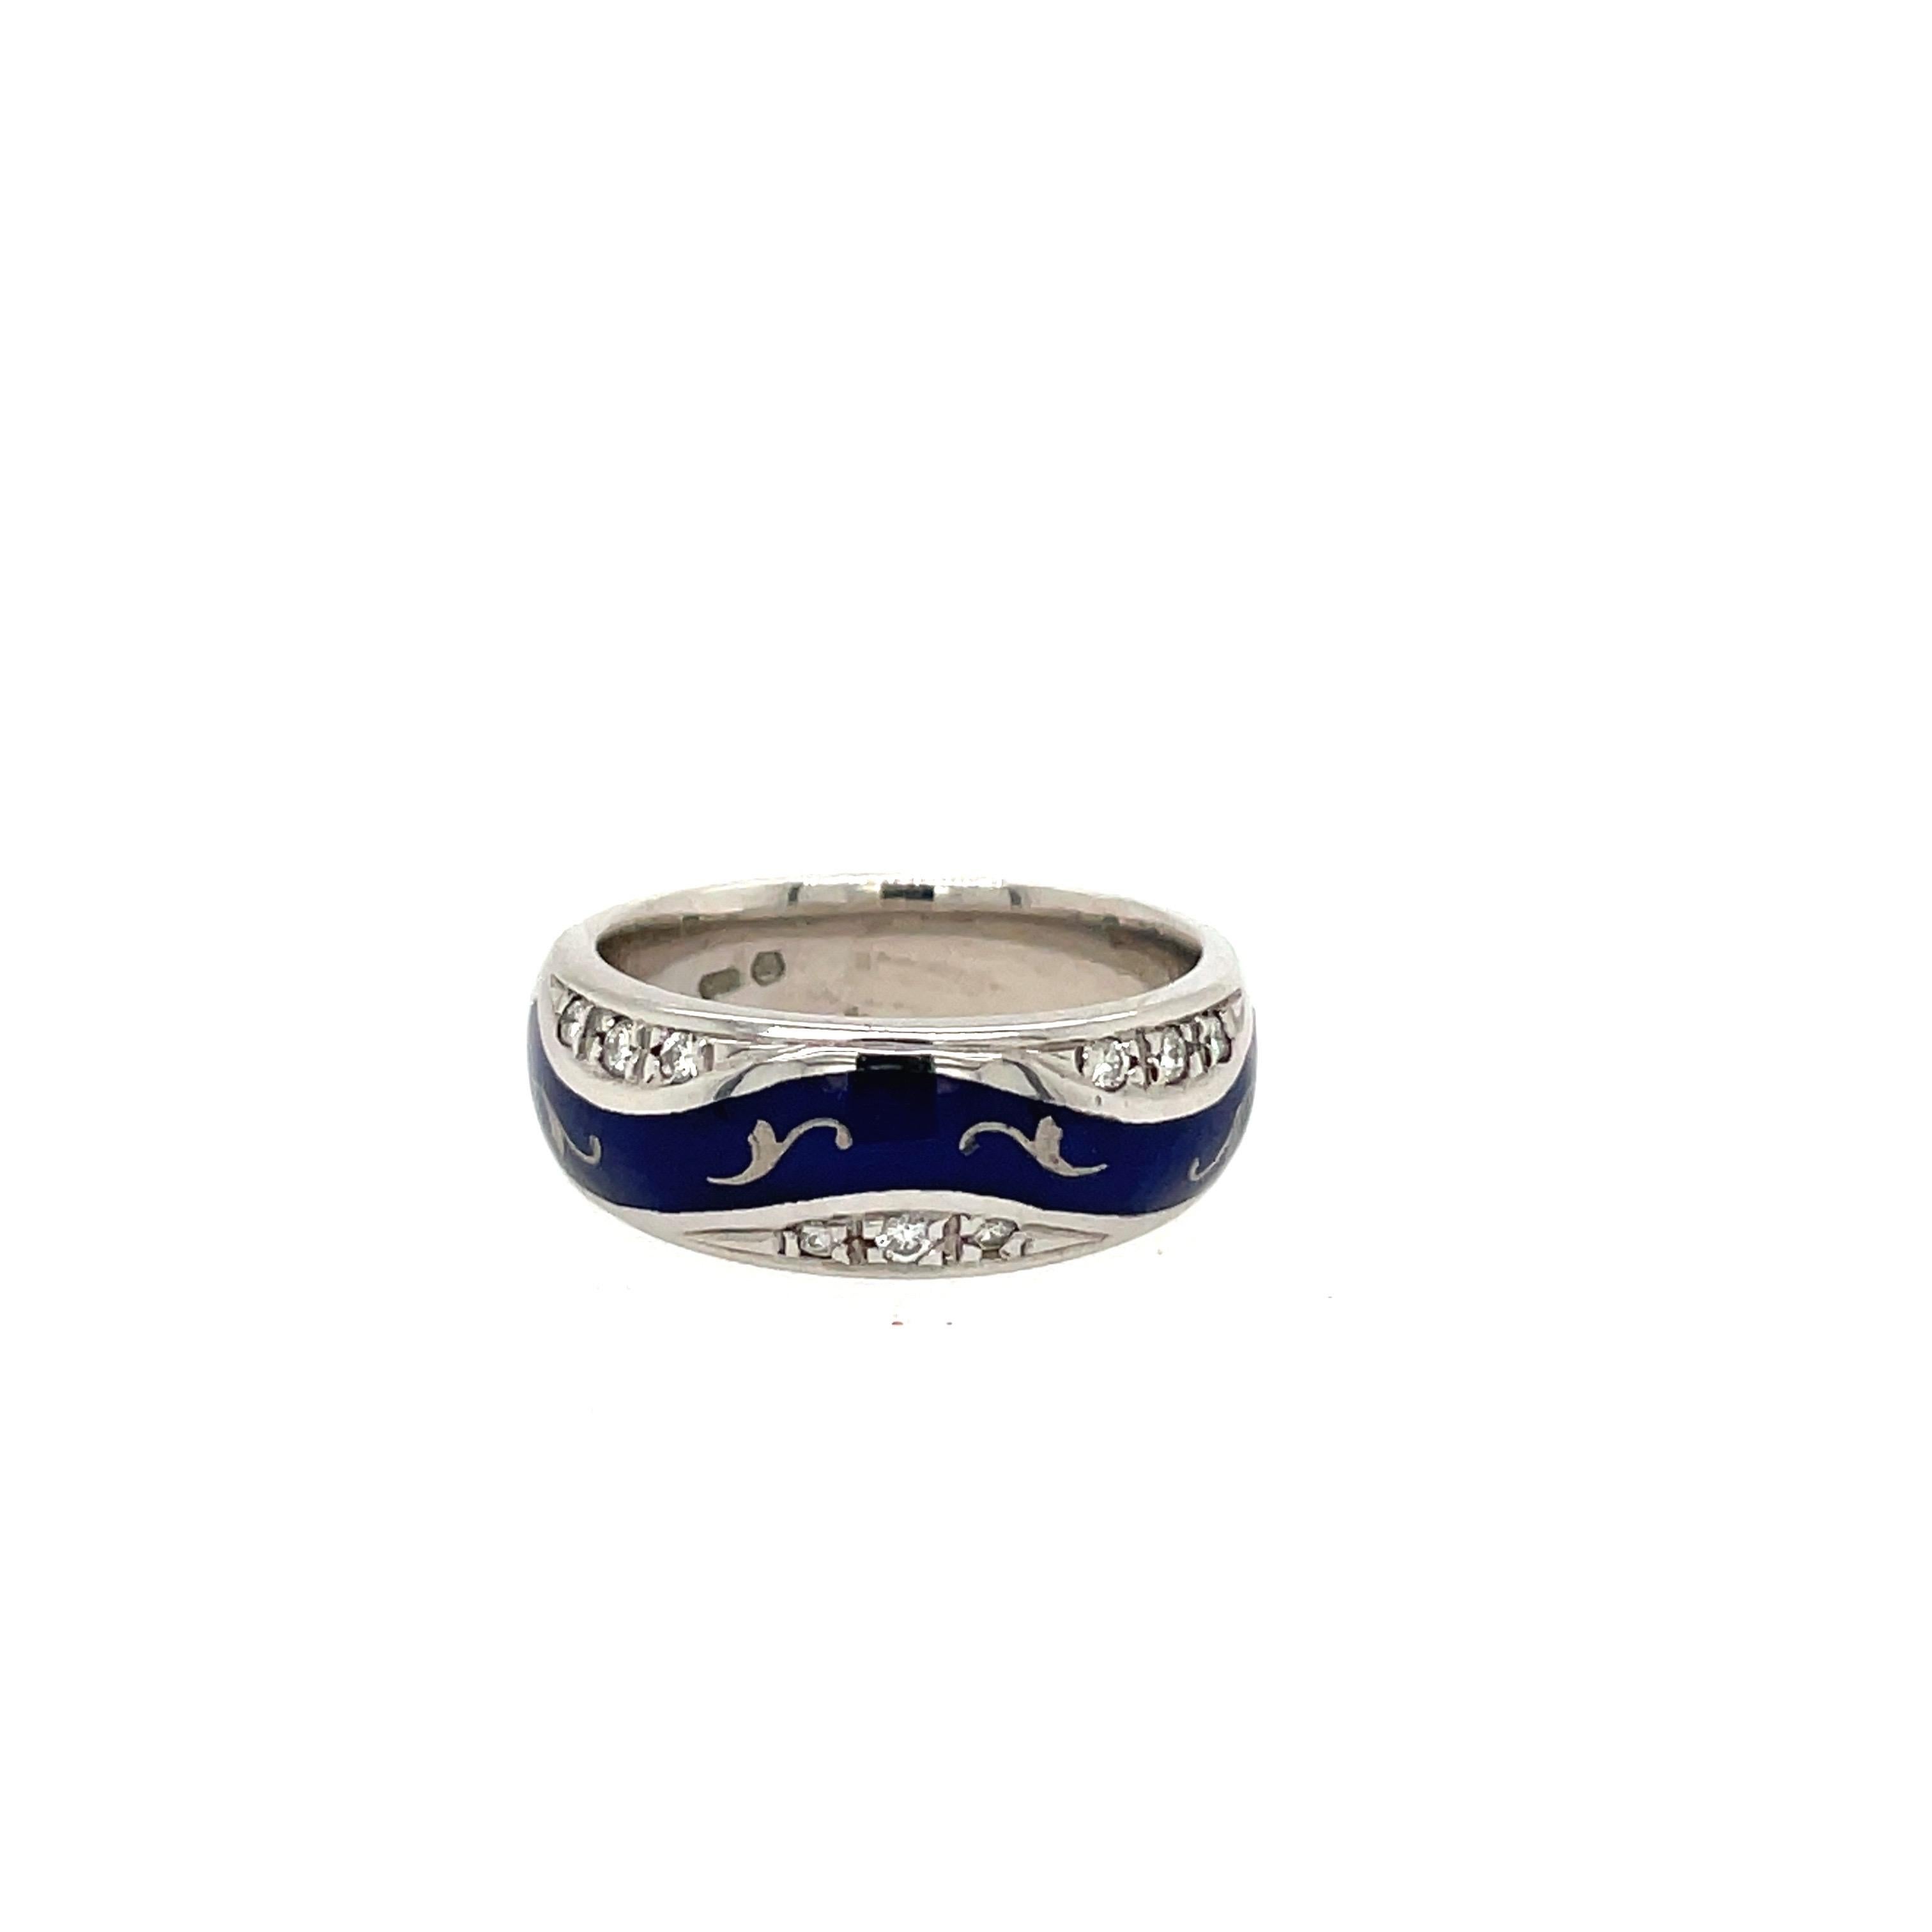 Round Cut Faberge 18KT Gold Diamond 0.15Ct. & Blue Enamel Band Ring #67/1000, Certificate For Sale